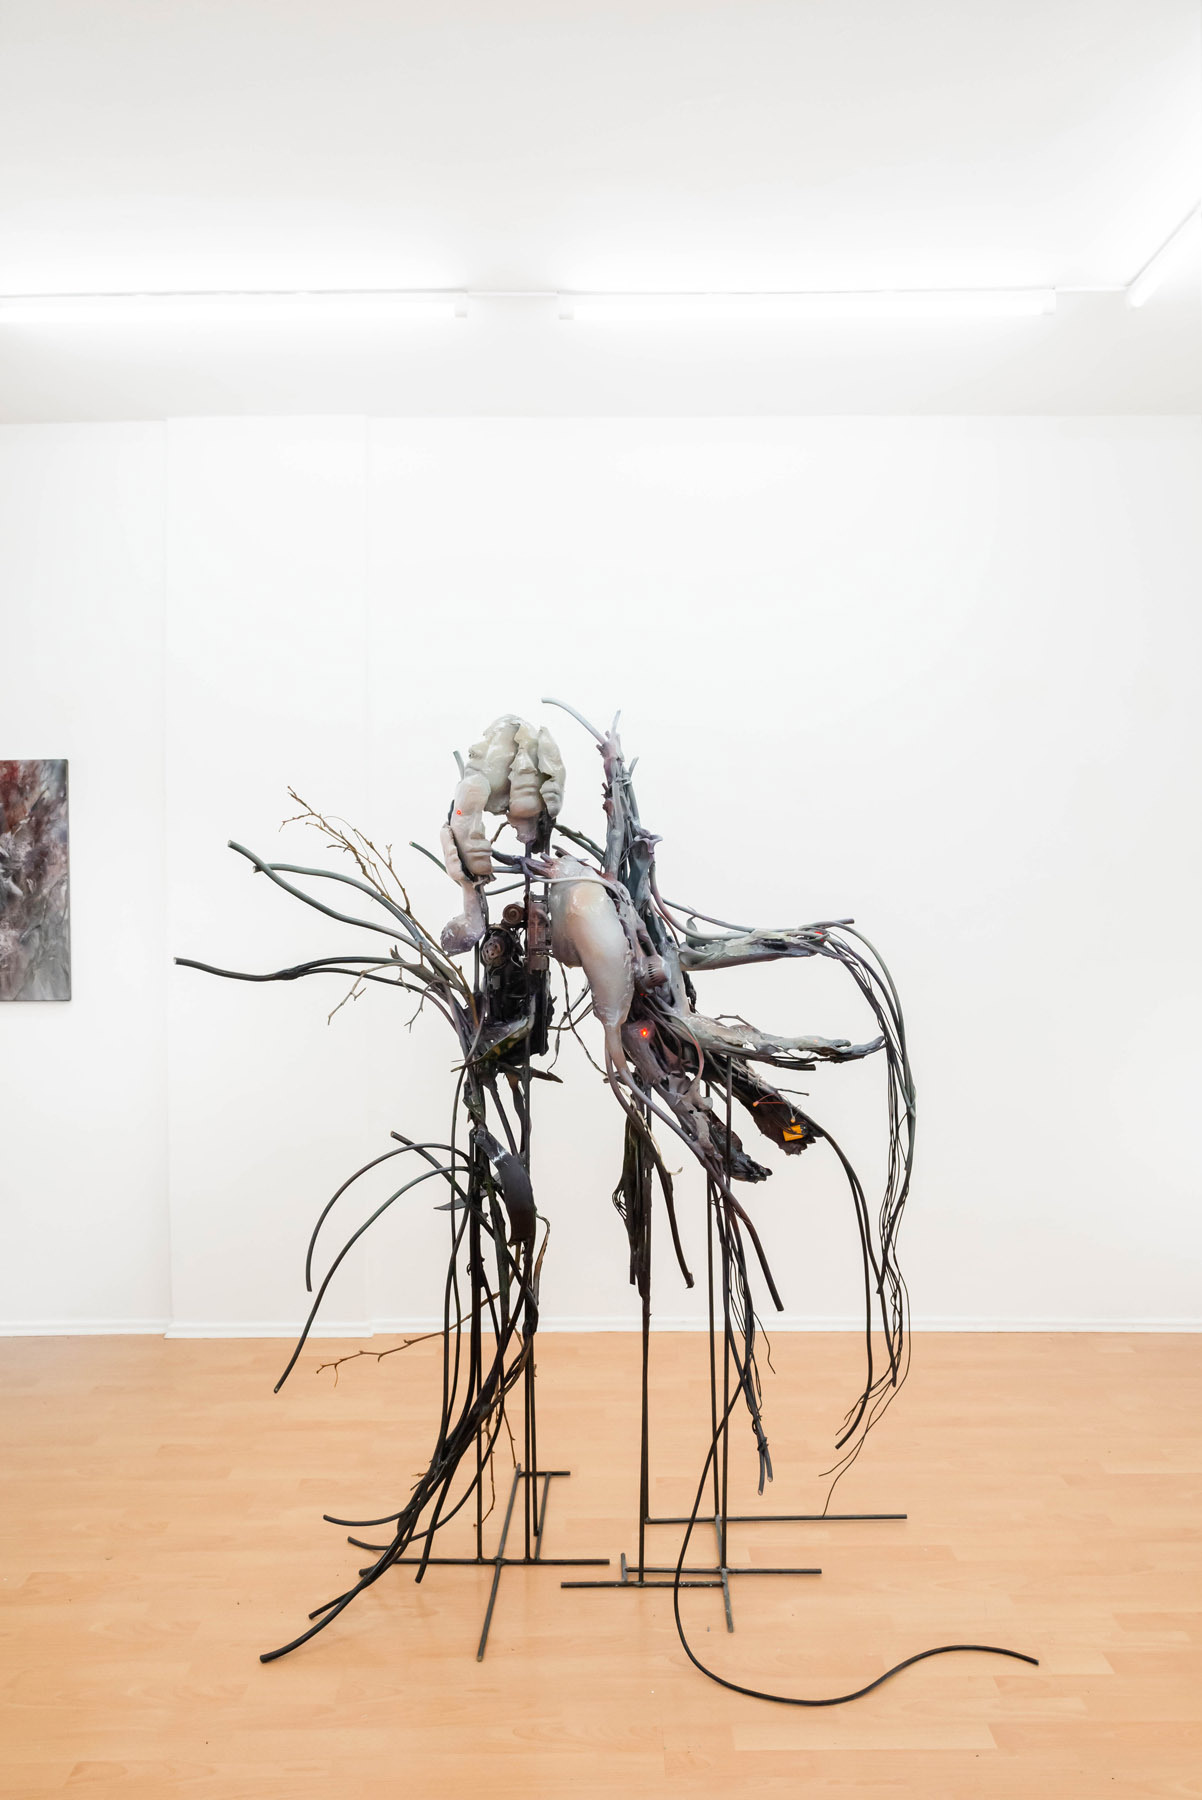 Yein Lee. devouring chaos - growth of reconstructed time, overflowing bodies, and static electricity, 2022, brocken chain saw, drill motor, mixer motor, fake flower, dry branches, electrical wire, polymer gypsum, epoxy putty, steal, acrylic color, lacquer